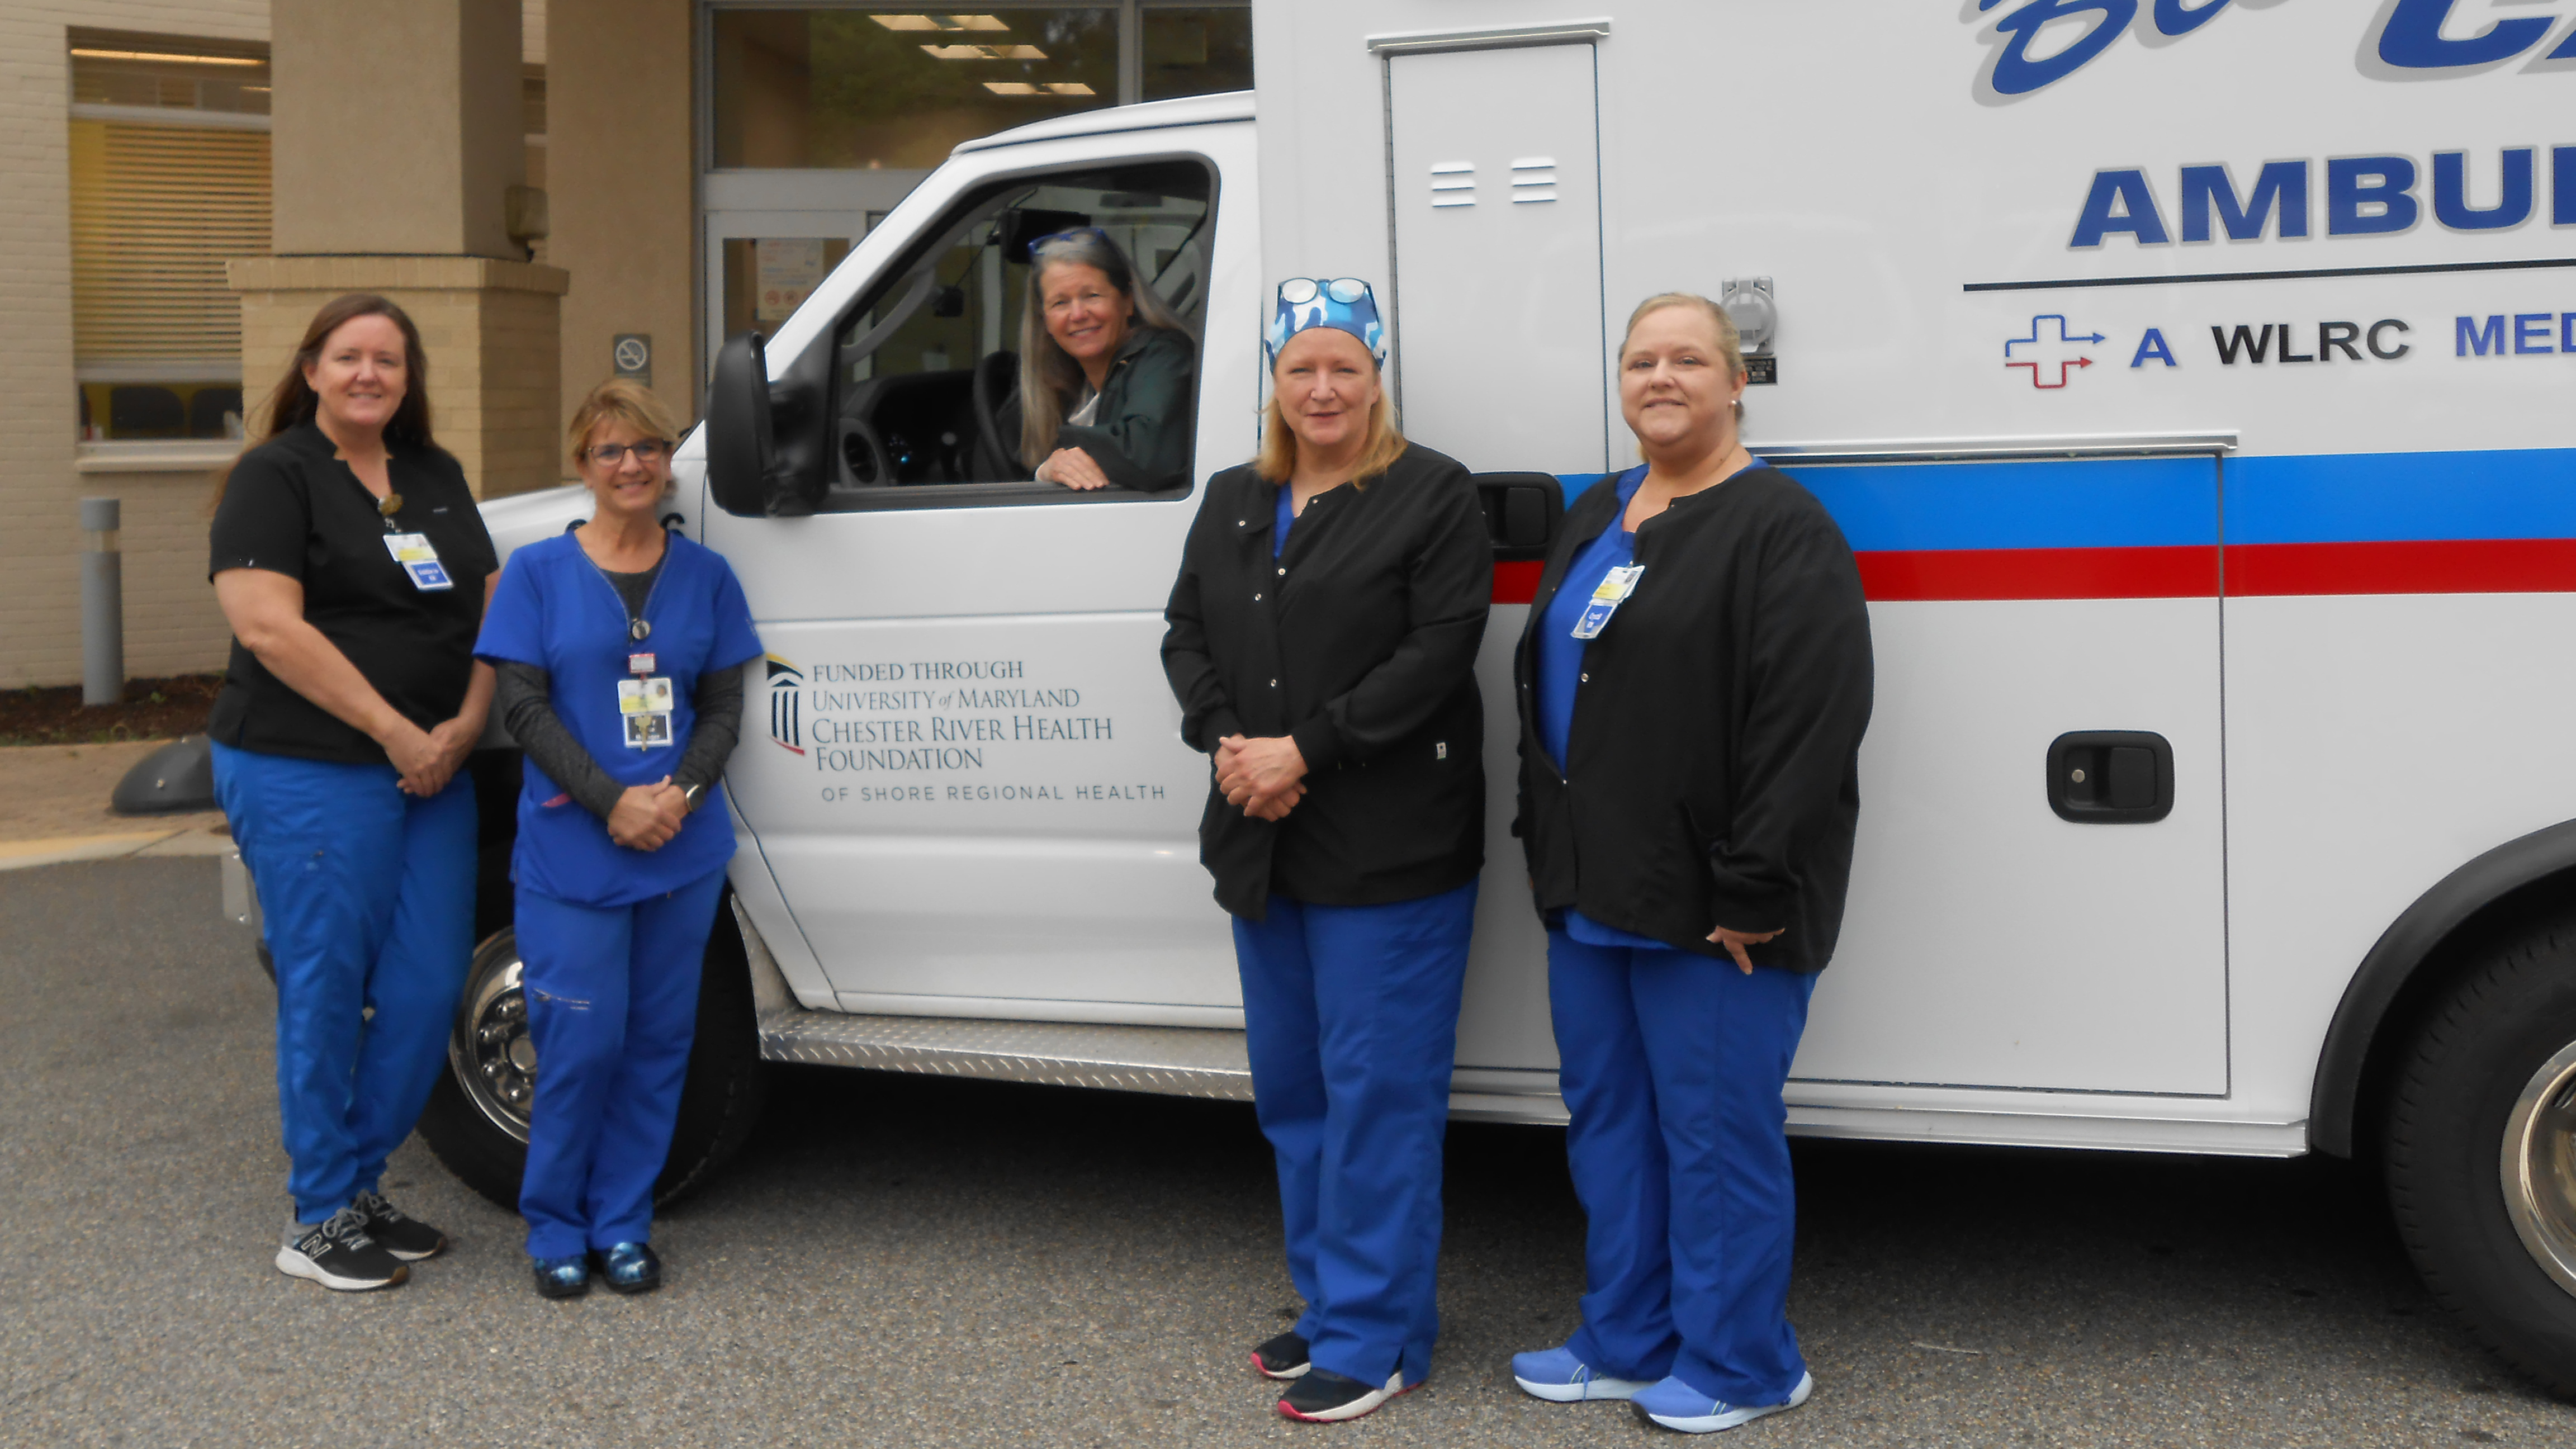 Four nurses stand in front of an ambulance while the chairperson of the Chester River Health Foundation sits in the driver's seat of the ambulance.